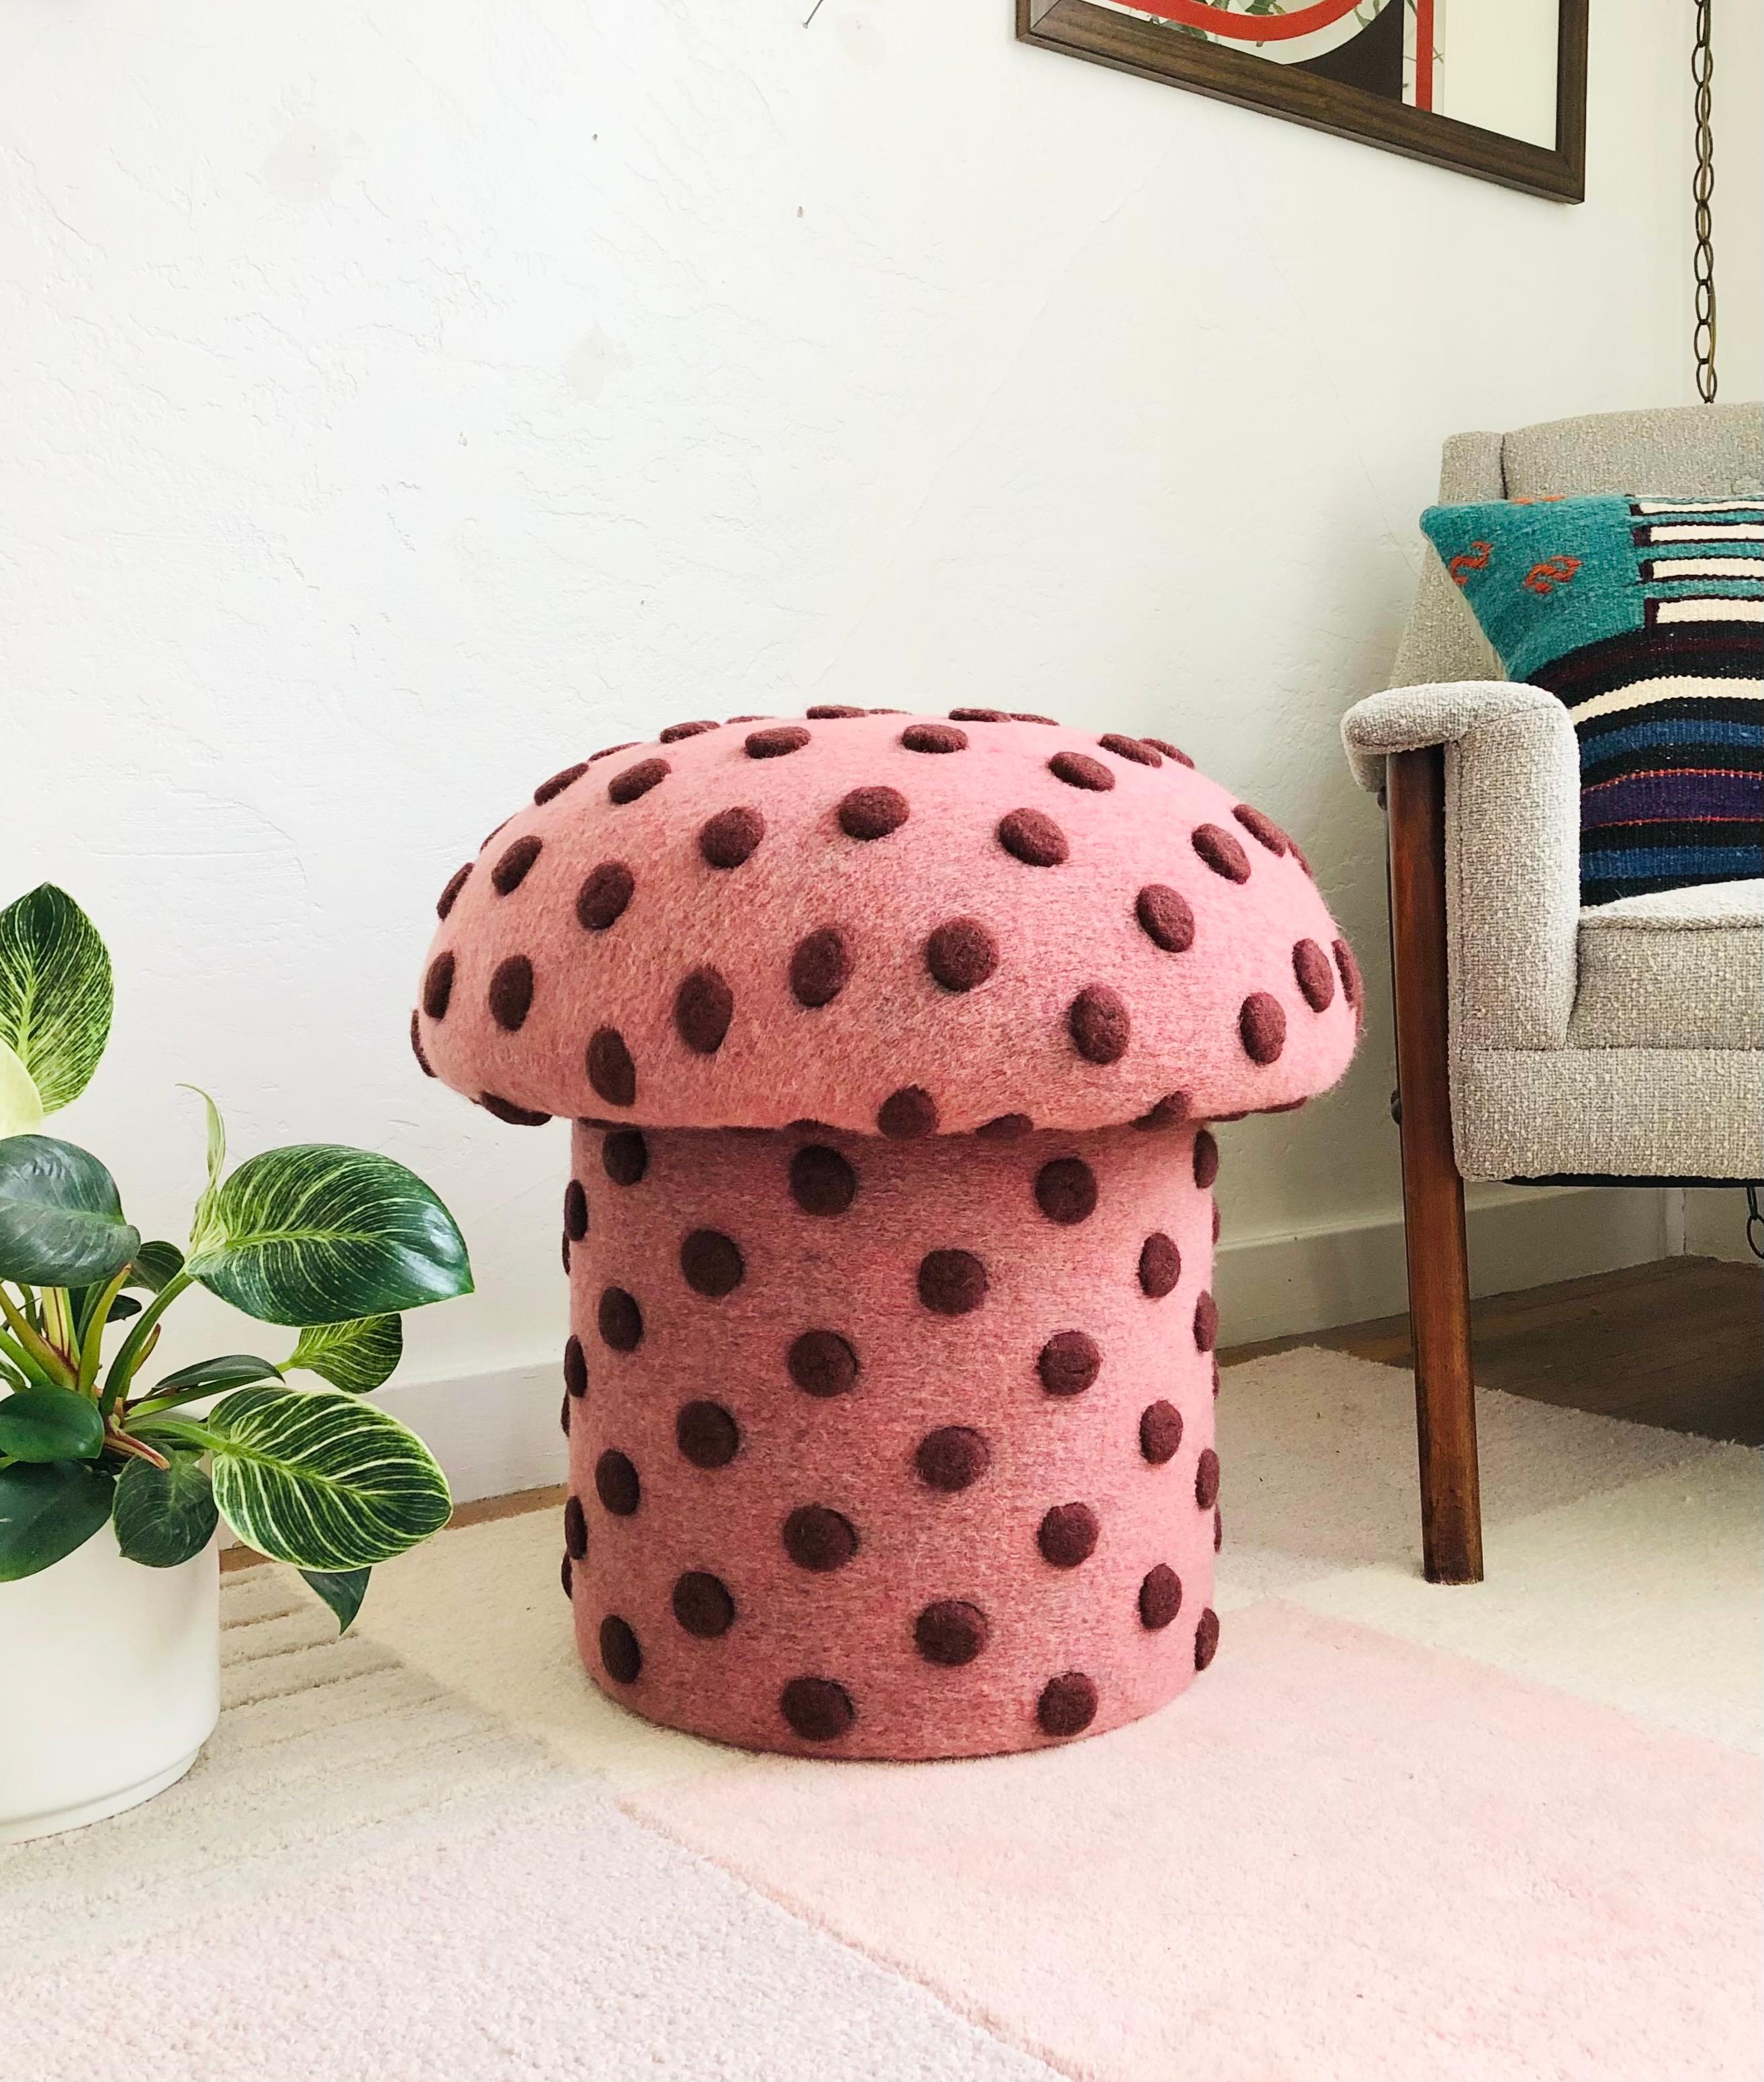 A handmade mushroom shaped ottoman, upholstered in a dotted wool blend fabric. Perfect for using as a footstool or extra occasional seating. A comfortable cushioned seat and sculptural accent piece. Fabric is a pink color with large textured